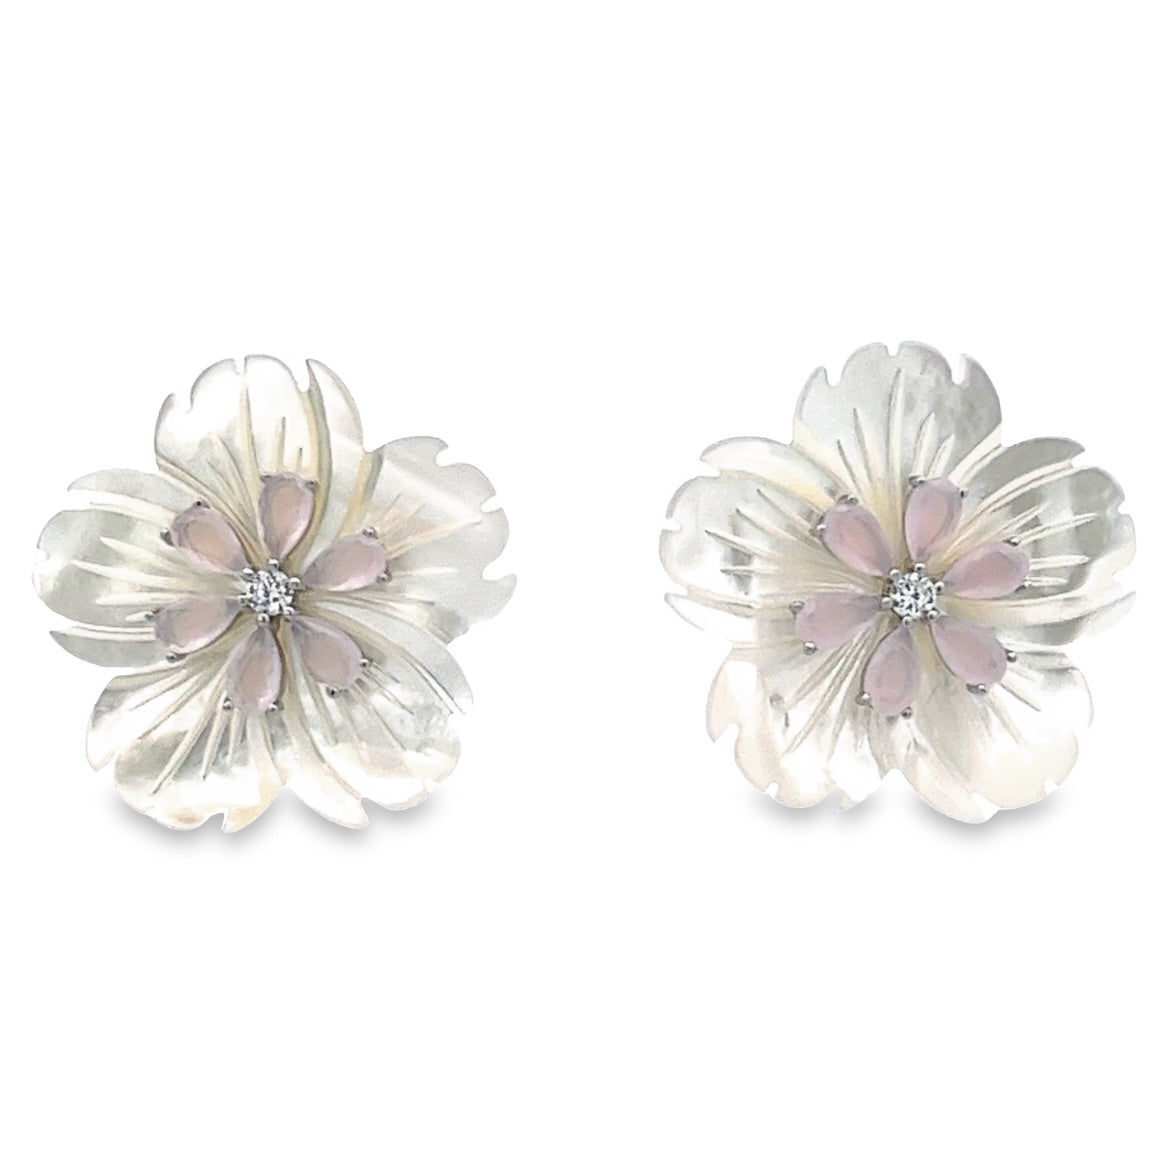 925 SILVER PLATED FLOWER EARRINGS WITH MOTHER OF PEARL